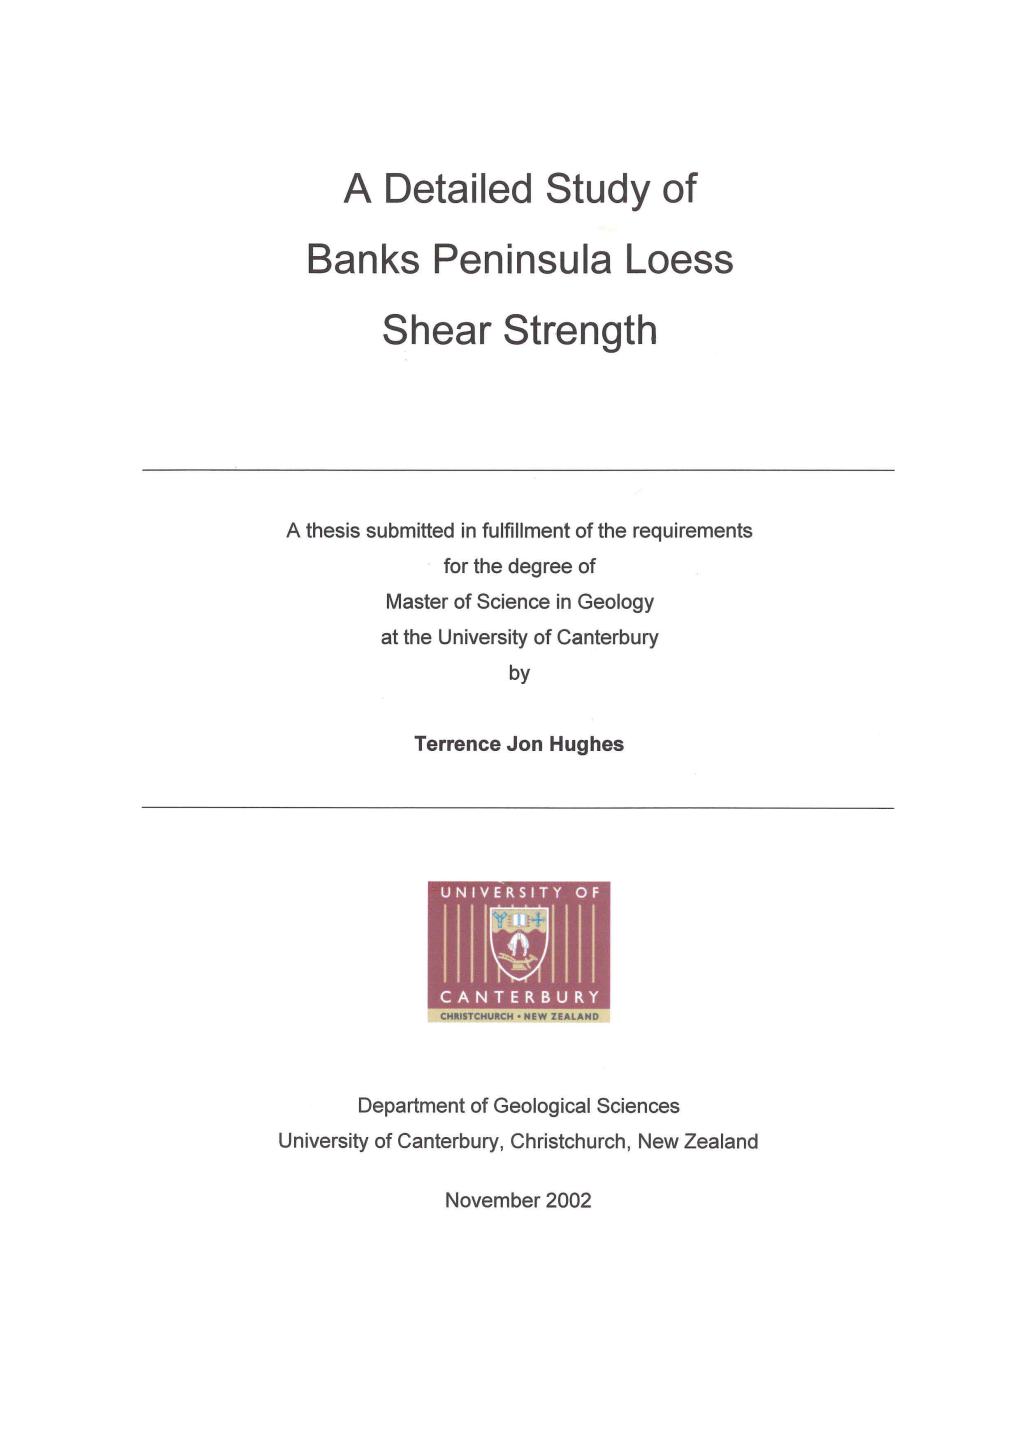 A Detailed Study of Banks Peninsula Loess Shear Strength